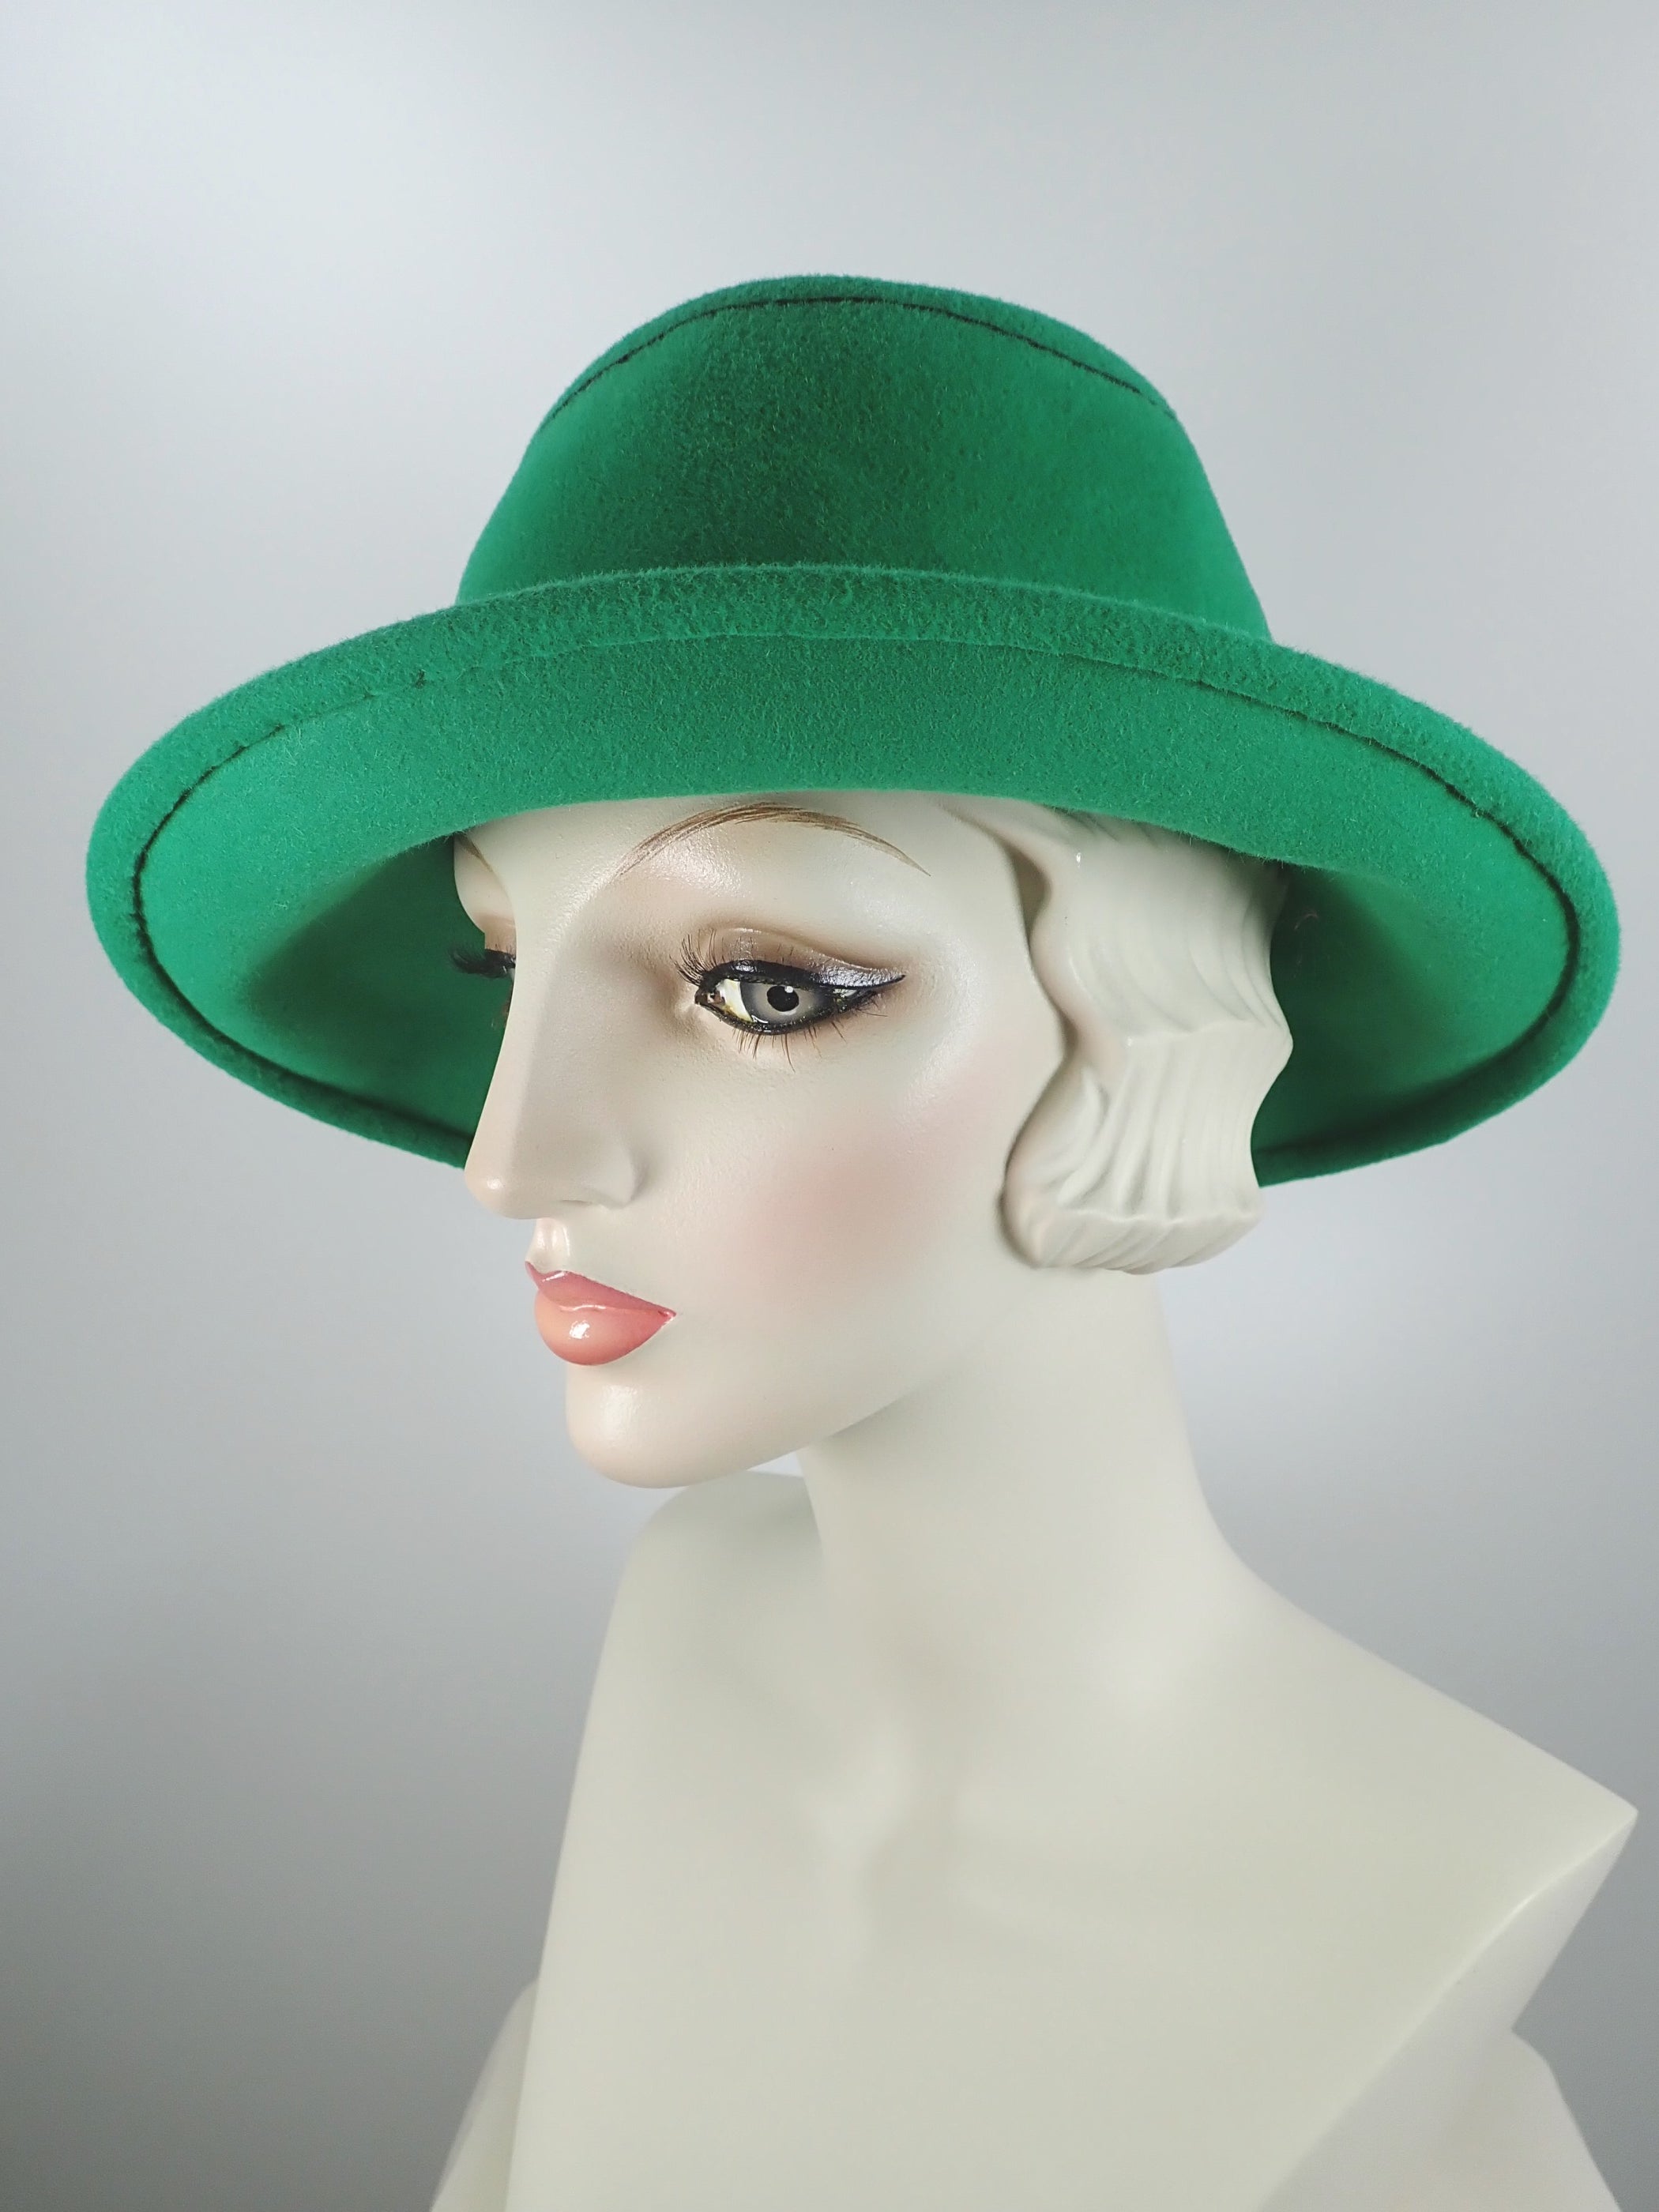 Women's green hat. Winter hat Downton Abbey. Black and green hat. Stitched embroidered hat. Ladies wool felt fashion hat.